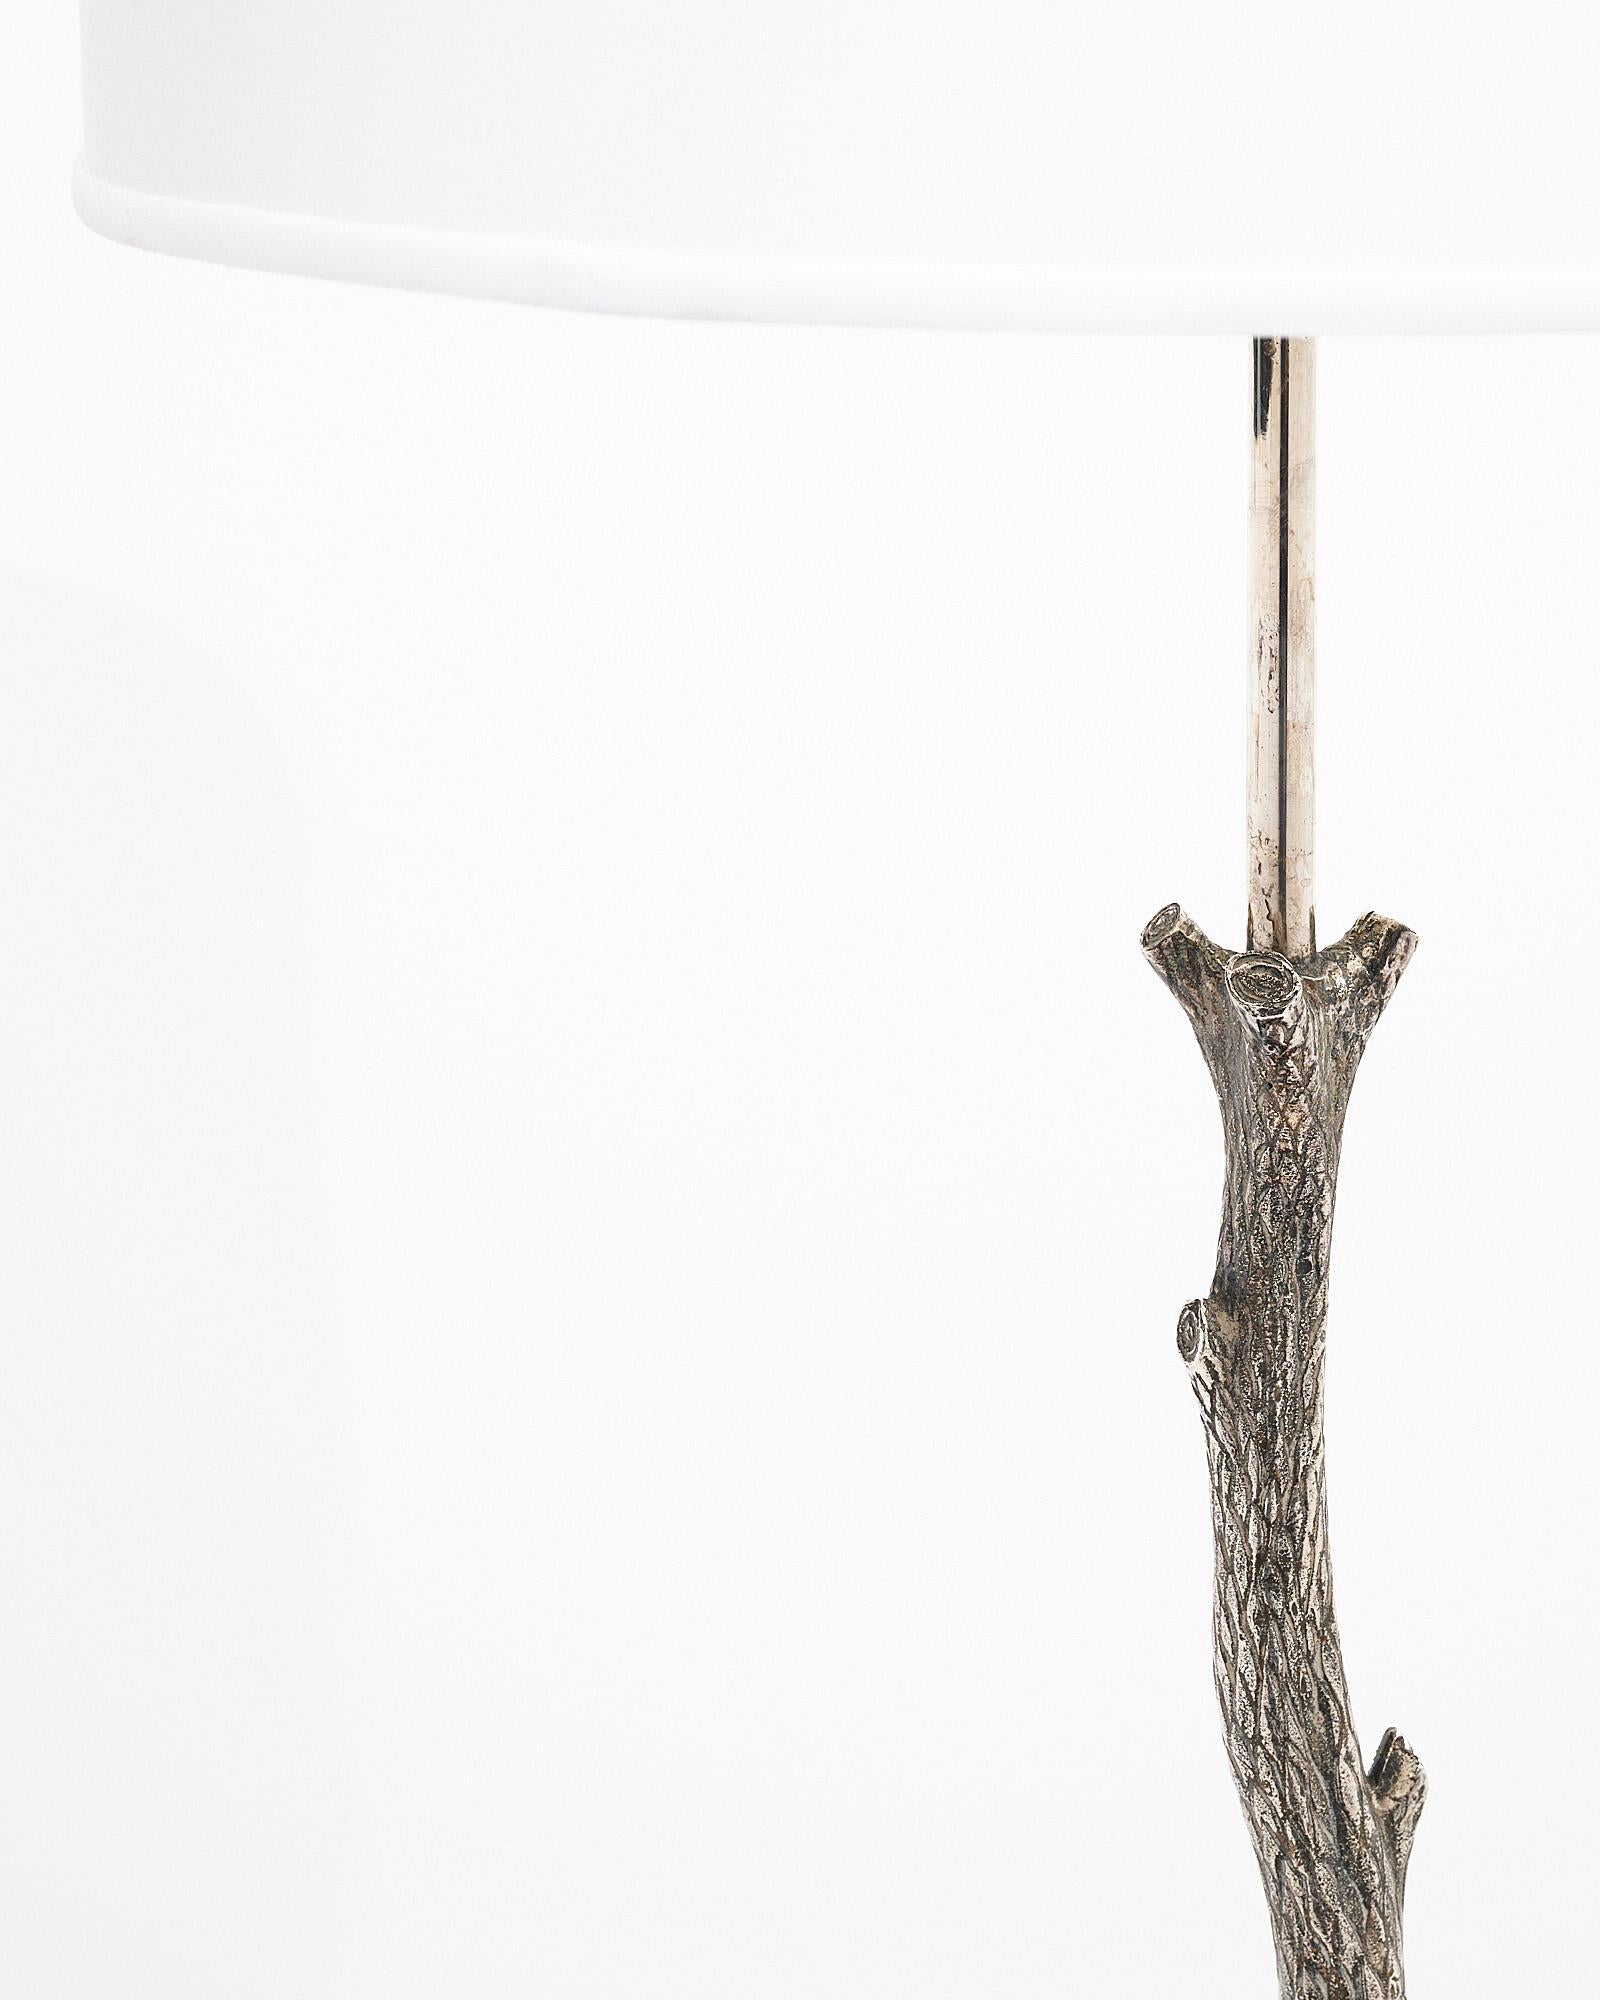 Floor lamp, Spanish, by iconic Barcelona design powerhouse Valenti. It is made of silvered plated bronze. The floor lamp is crafted to replicate a young tree. We love the exquisite details and the original patina. It has been newly wired to fit US